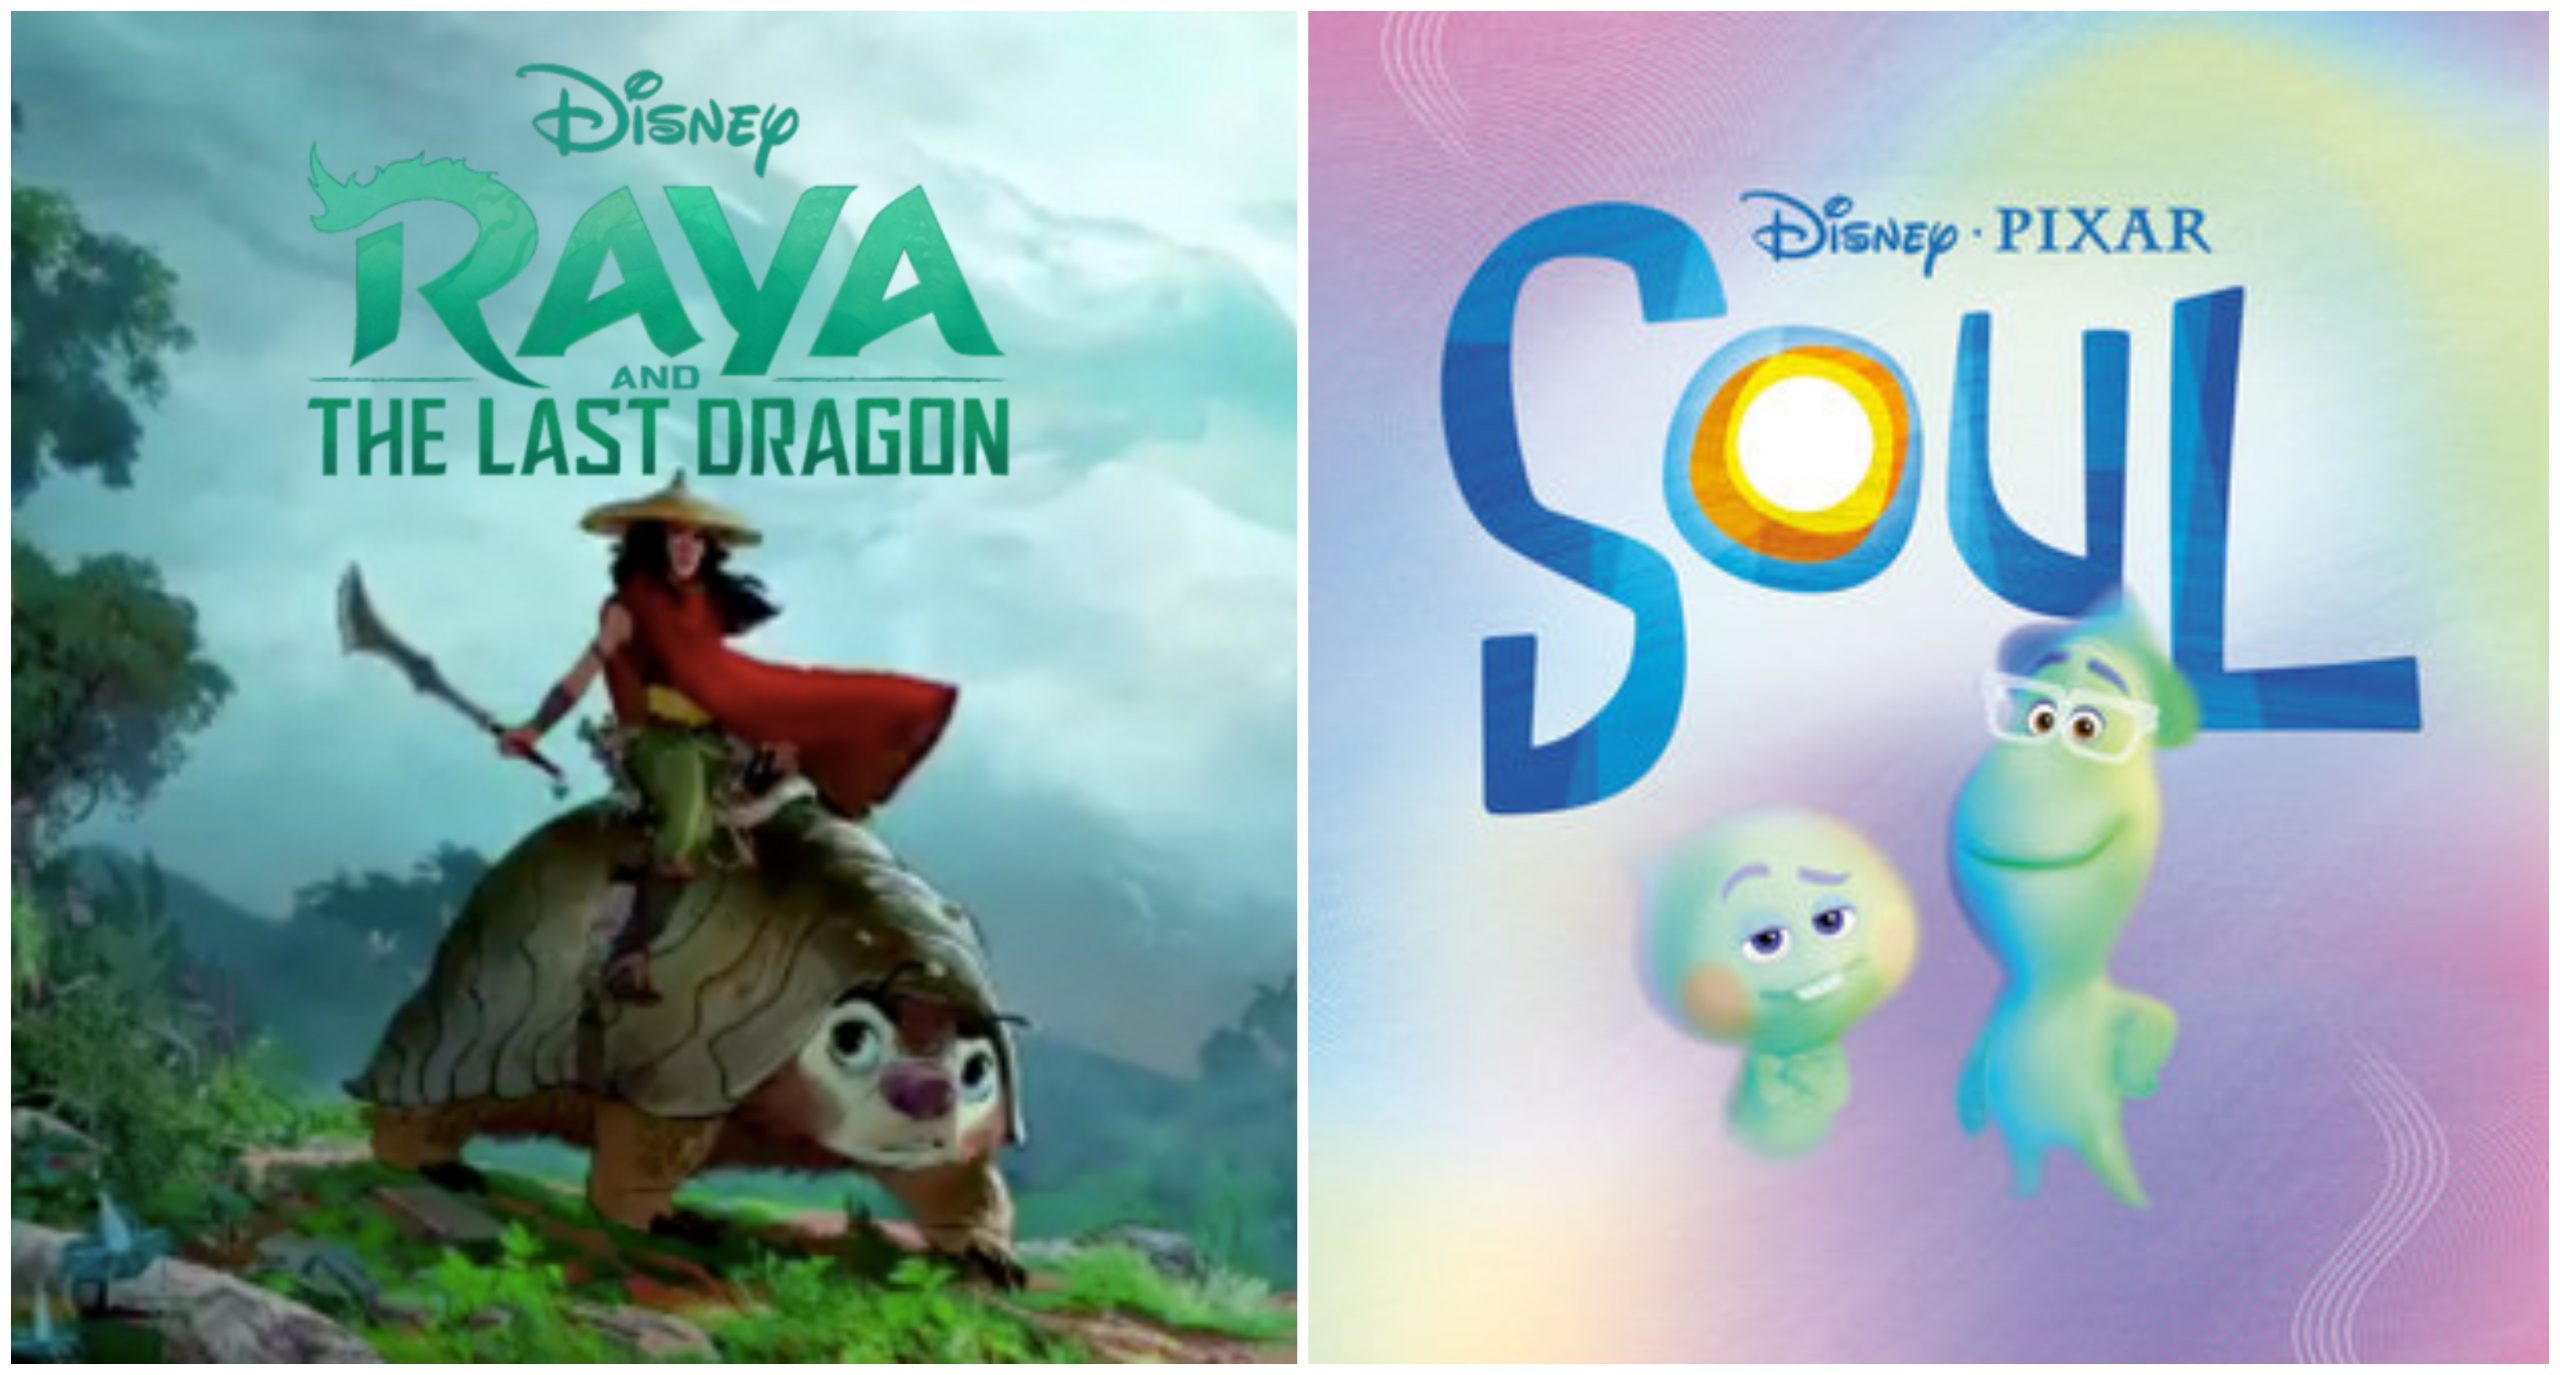 Theatrical Releases Pushed Back for Disney’s ‘Raya and the Last Dragon’ and Pixar’s ‘Soul’